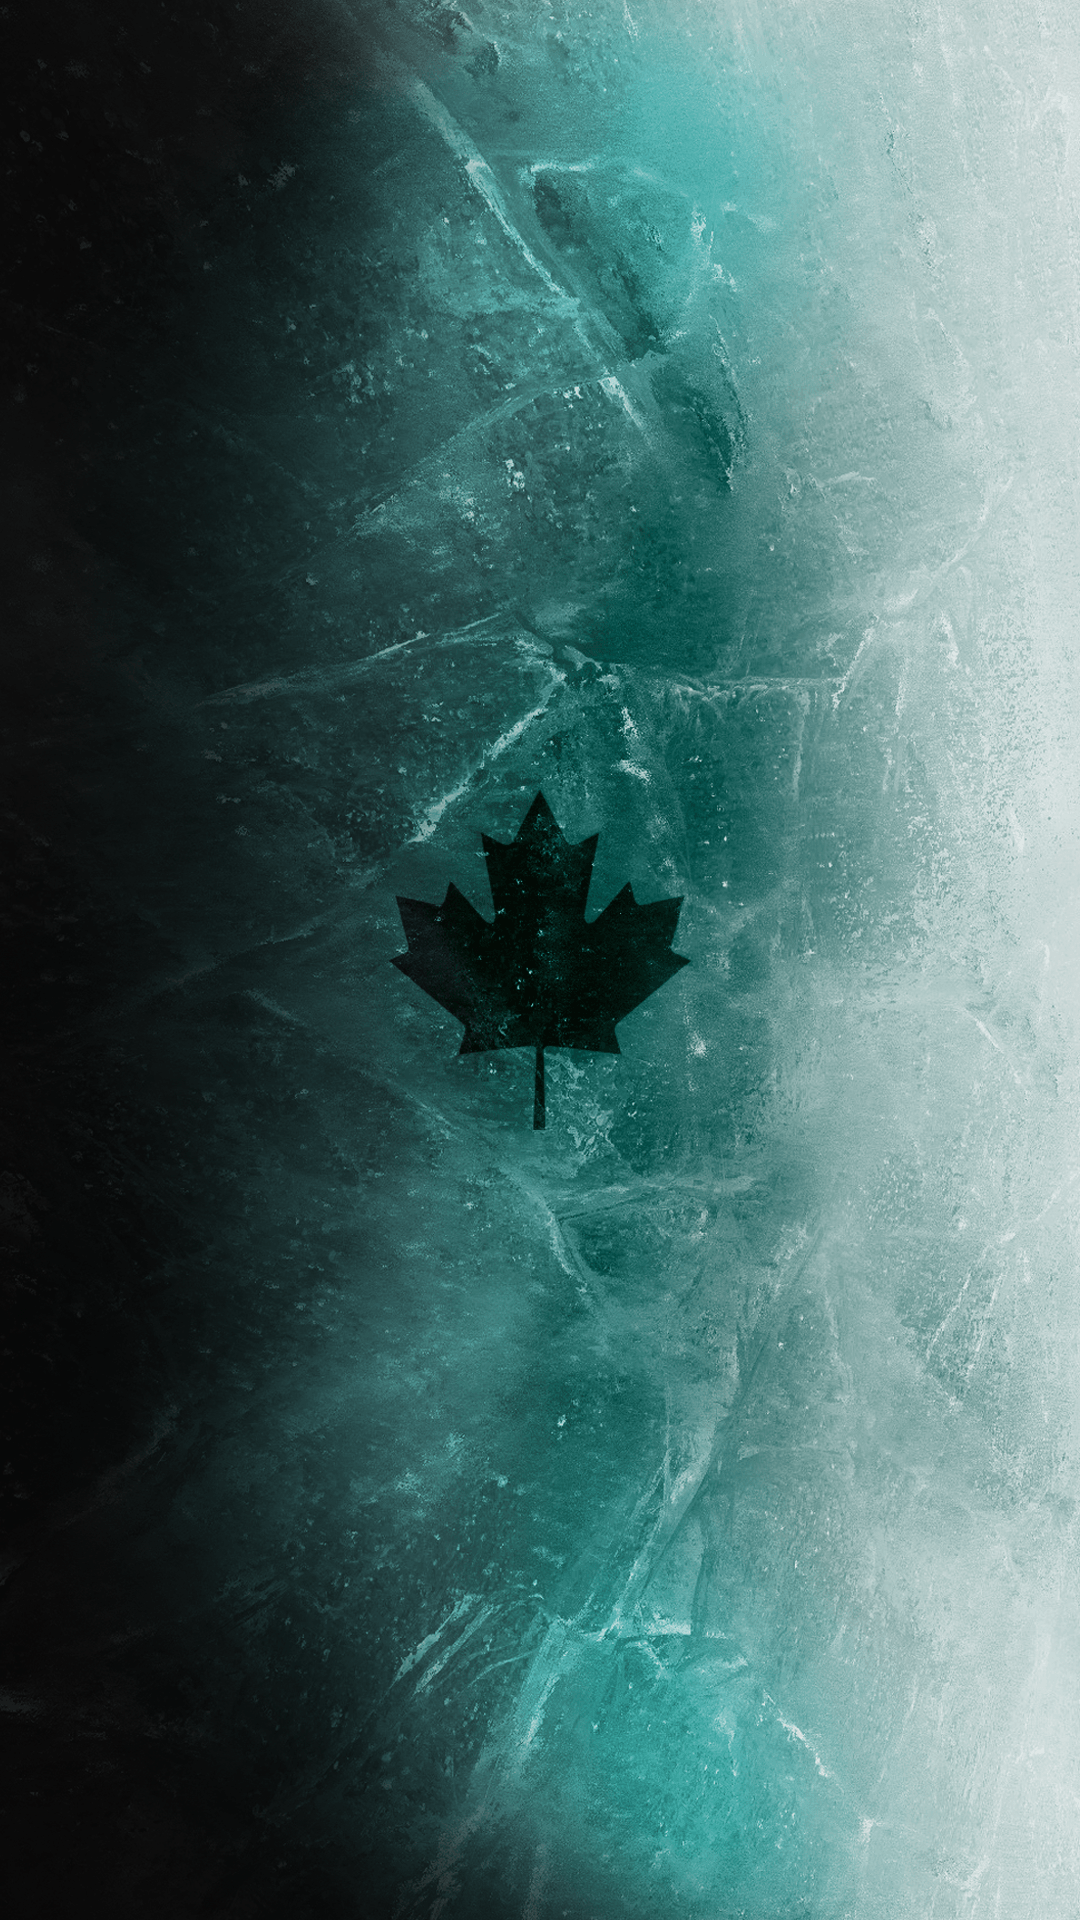 Black Ice Mobile Wallpaper i made on Photohop. Rate 1 to 10